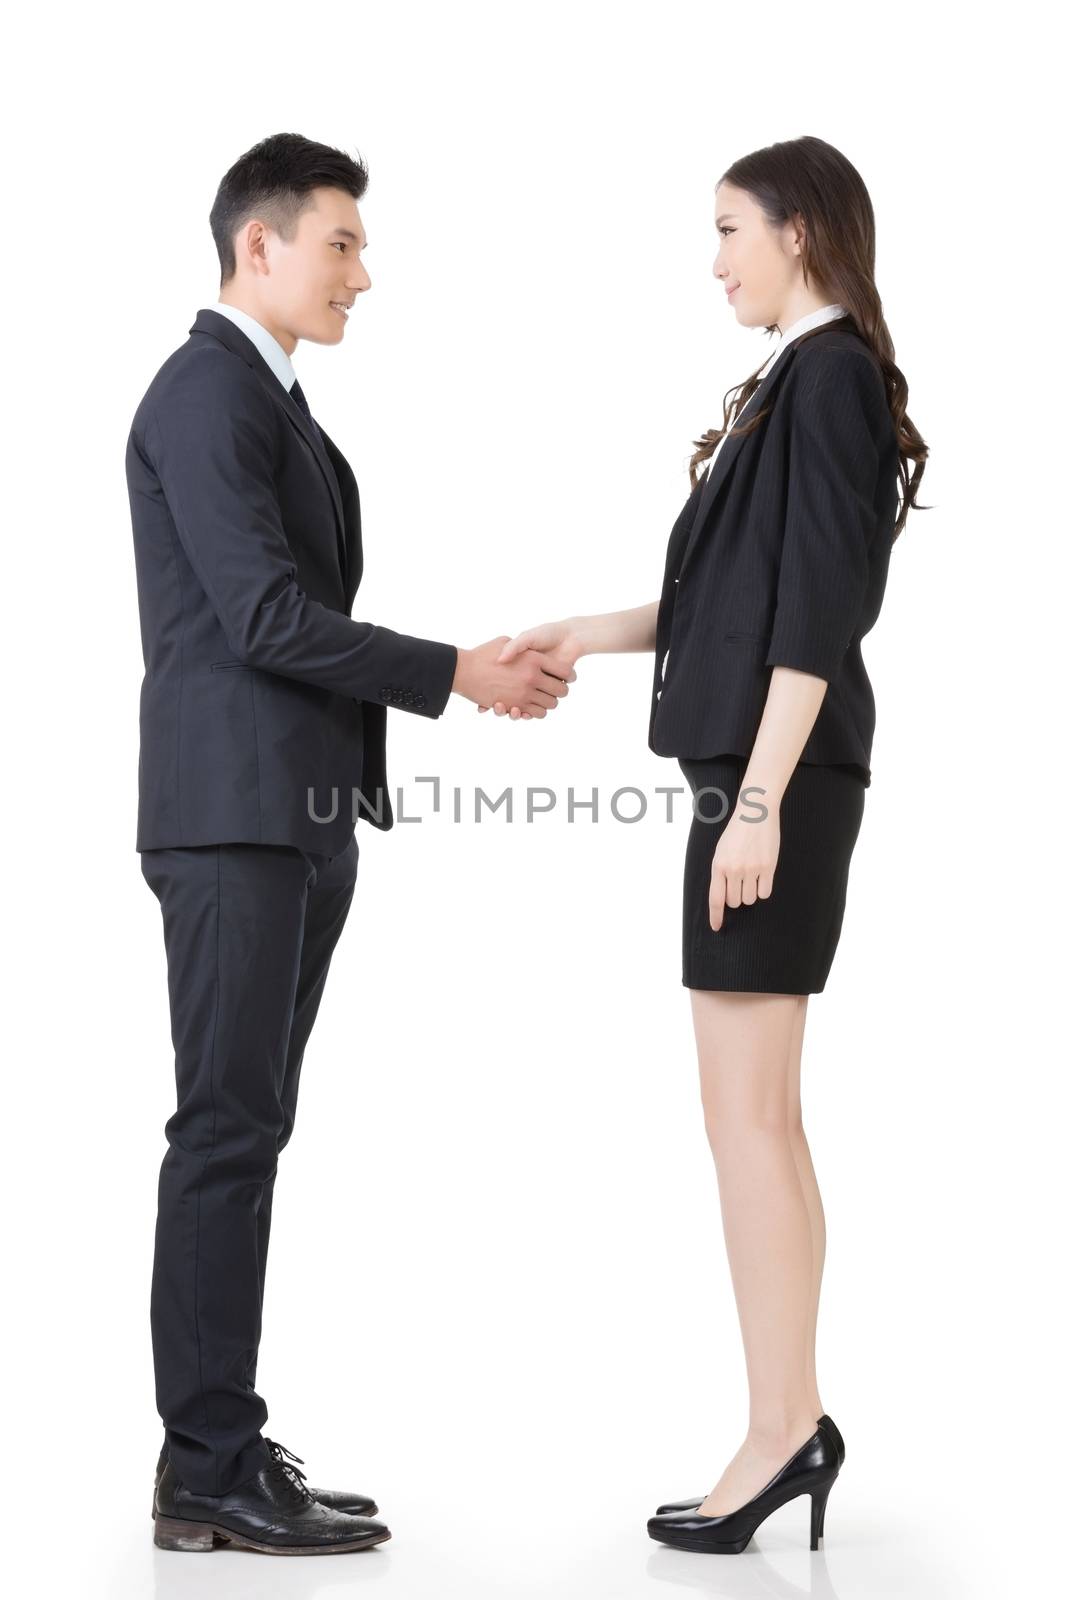 Asian business man and woman shake hands by elwynn